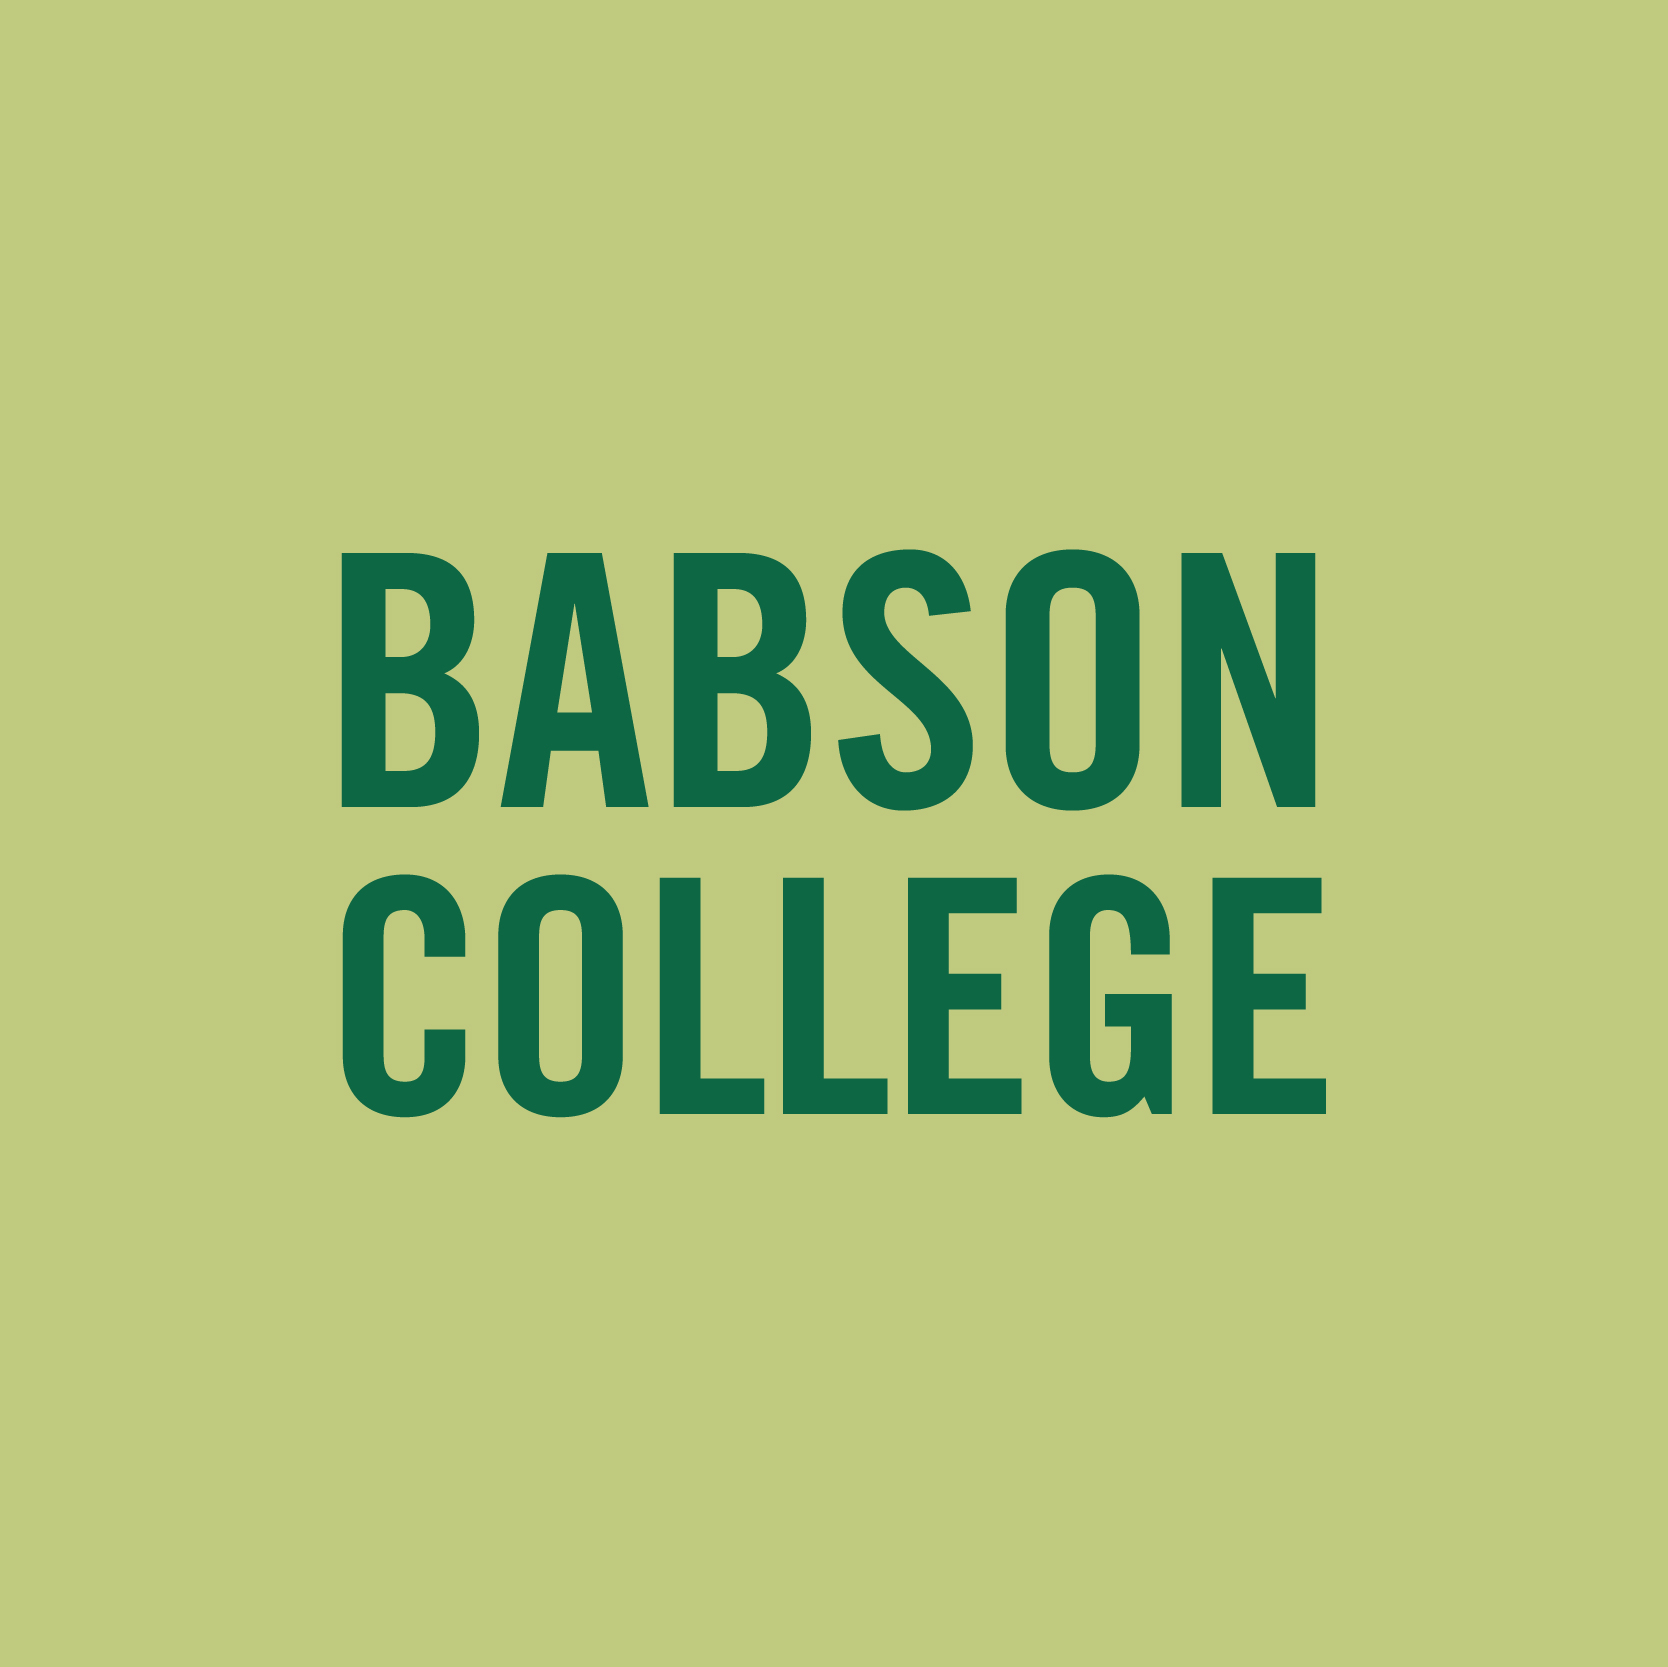 Image of Babson College Type